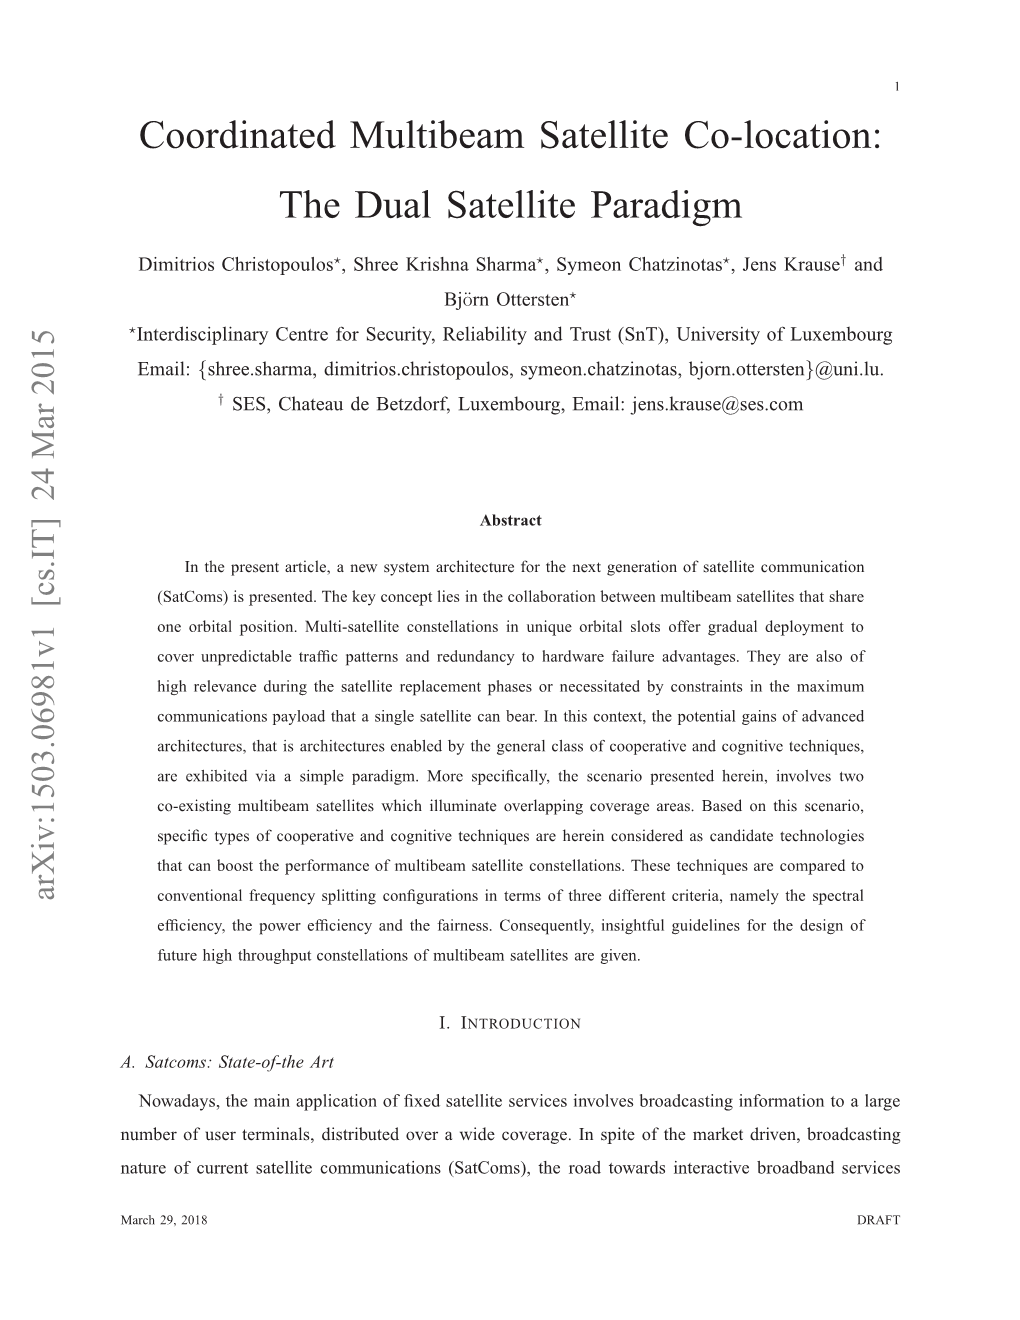 The Dual Satellite Paradigm, an Instance of a Multibeam Satellite Constellation, Is Formulated